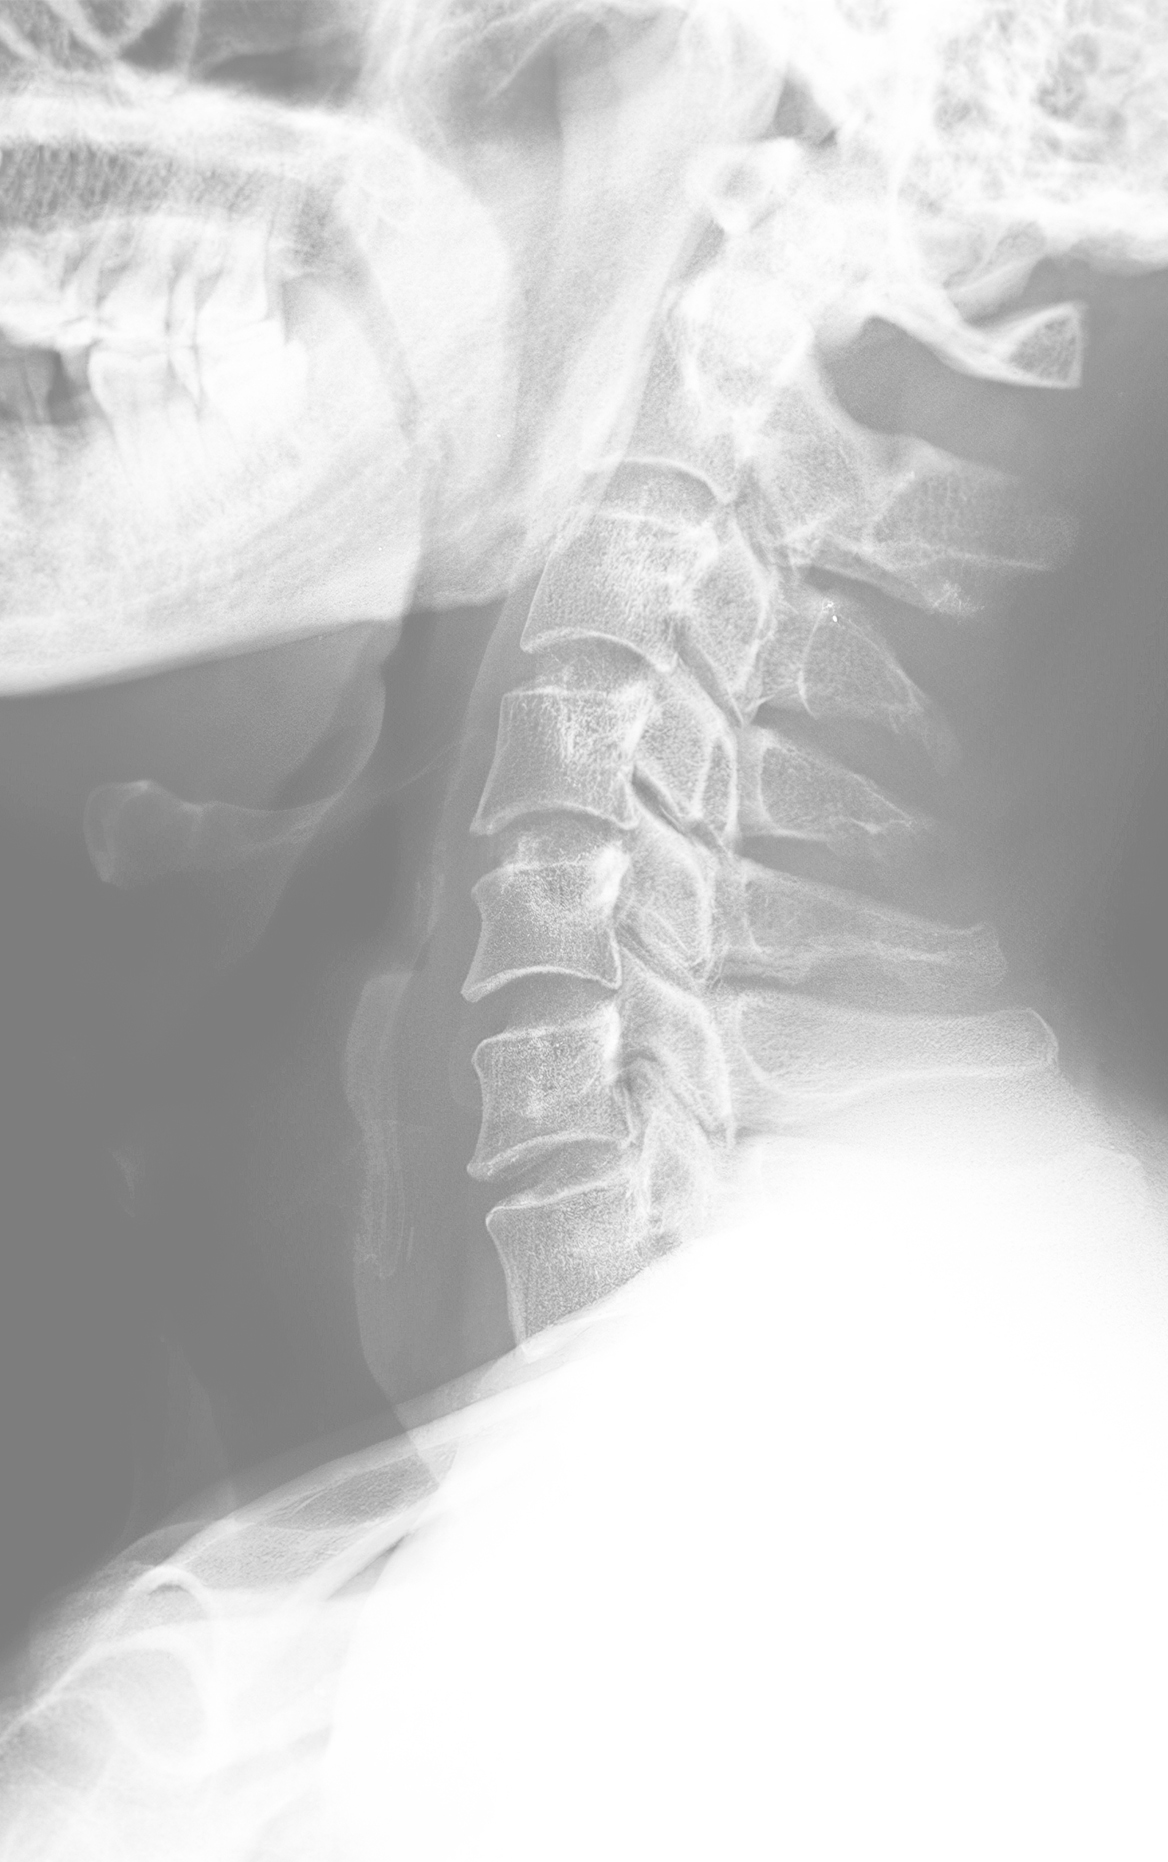 A close-up of a neck x-ray.